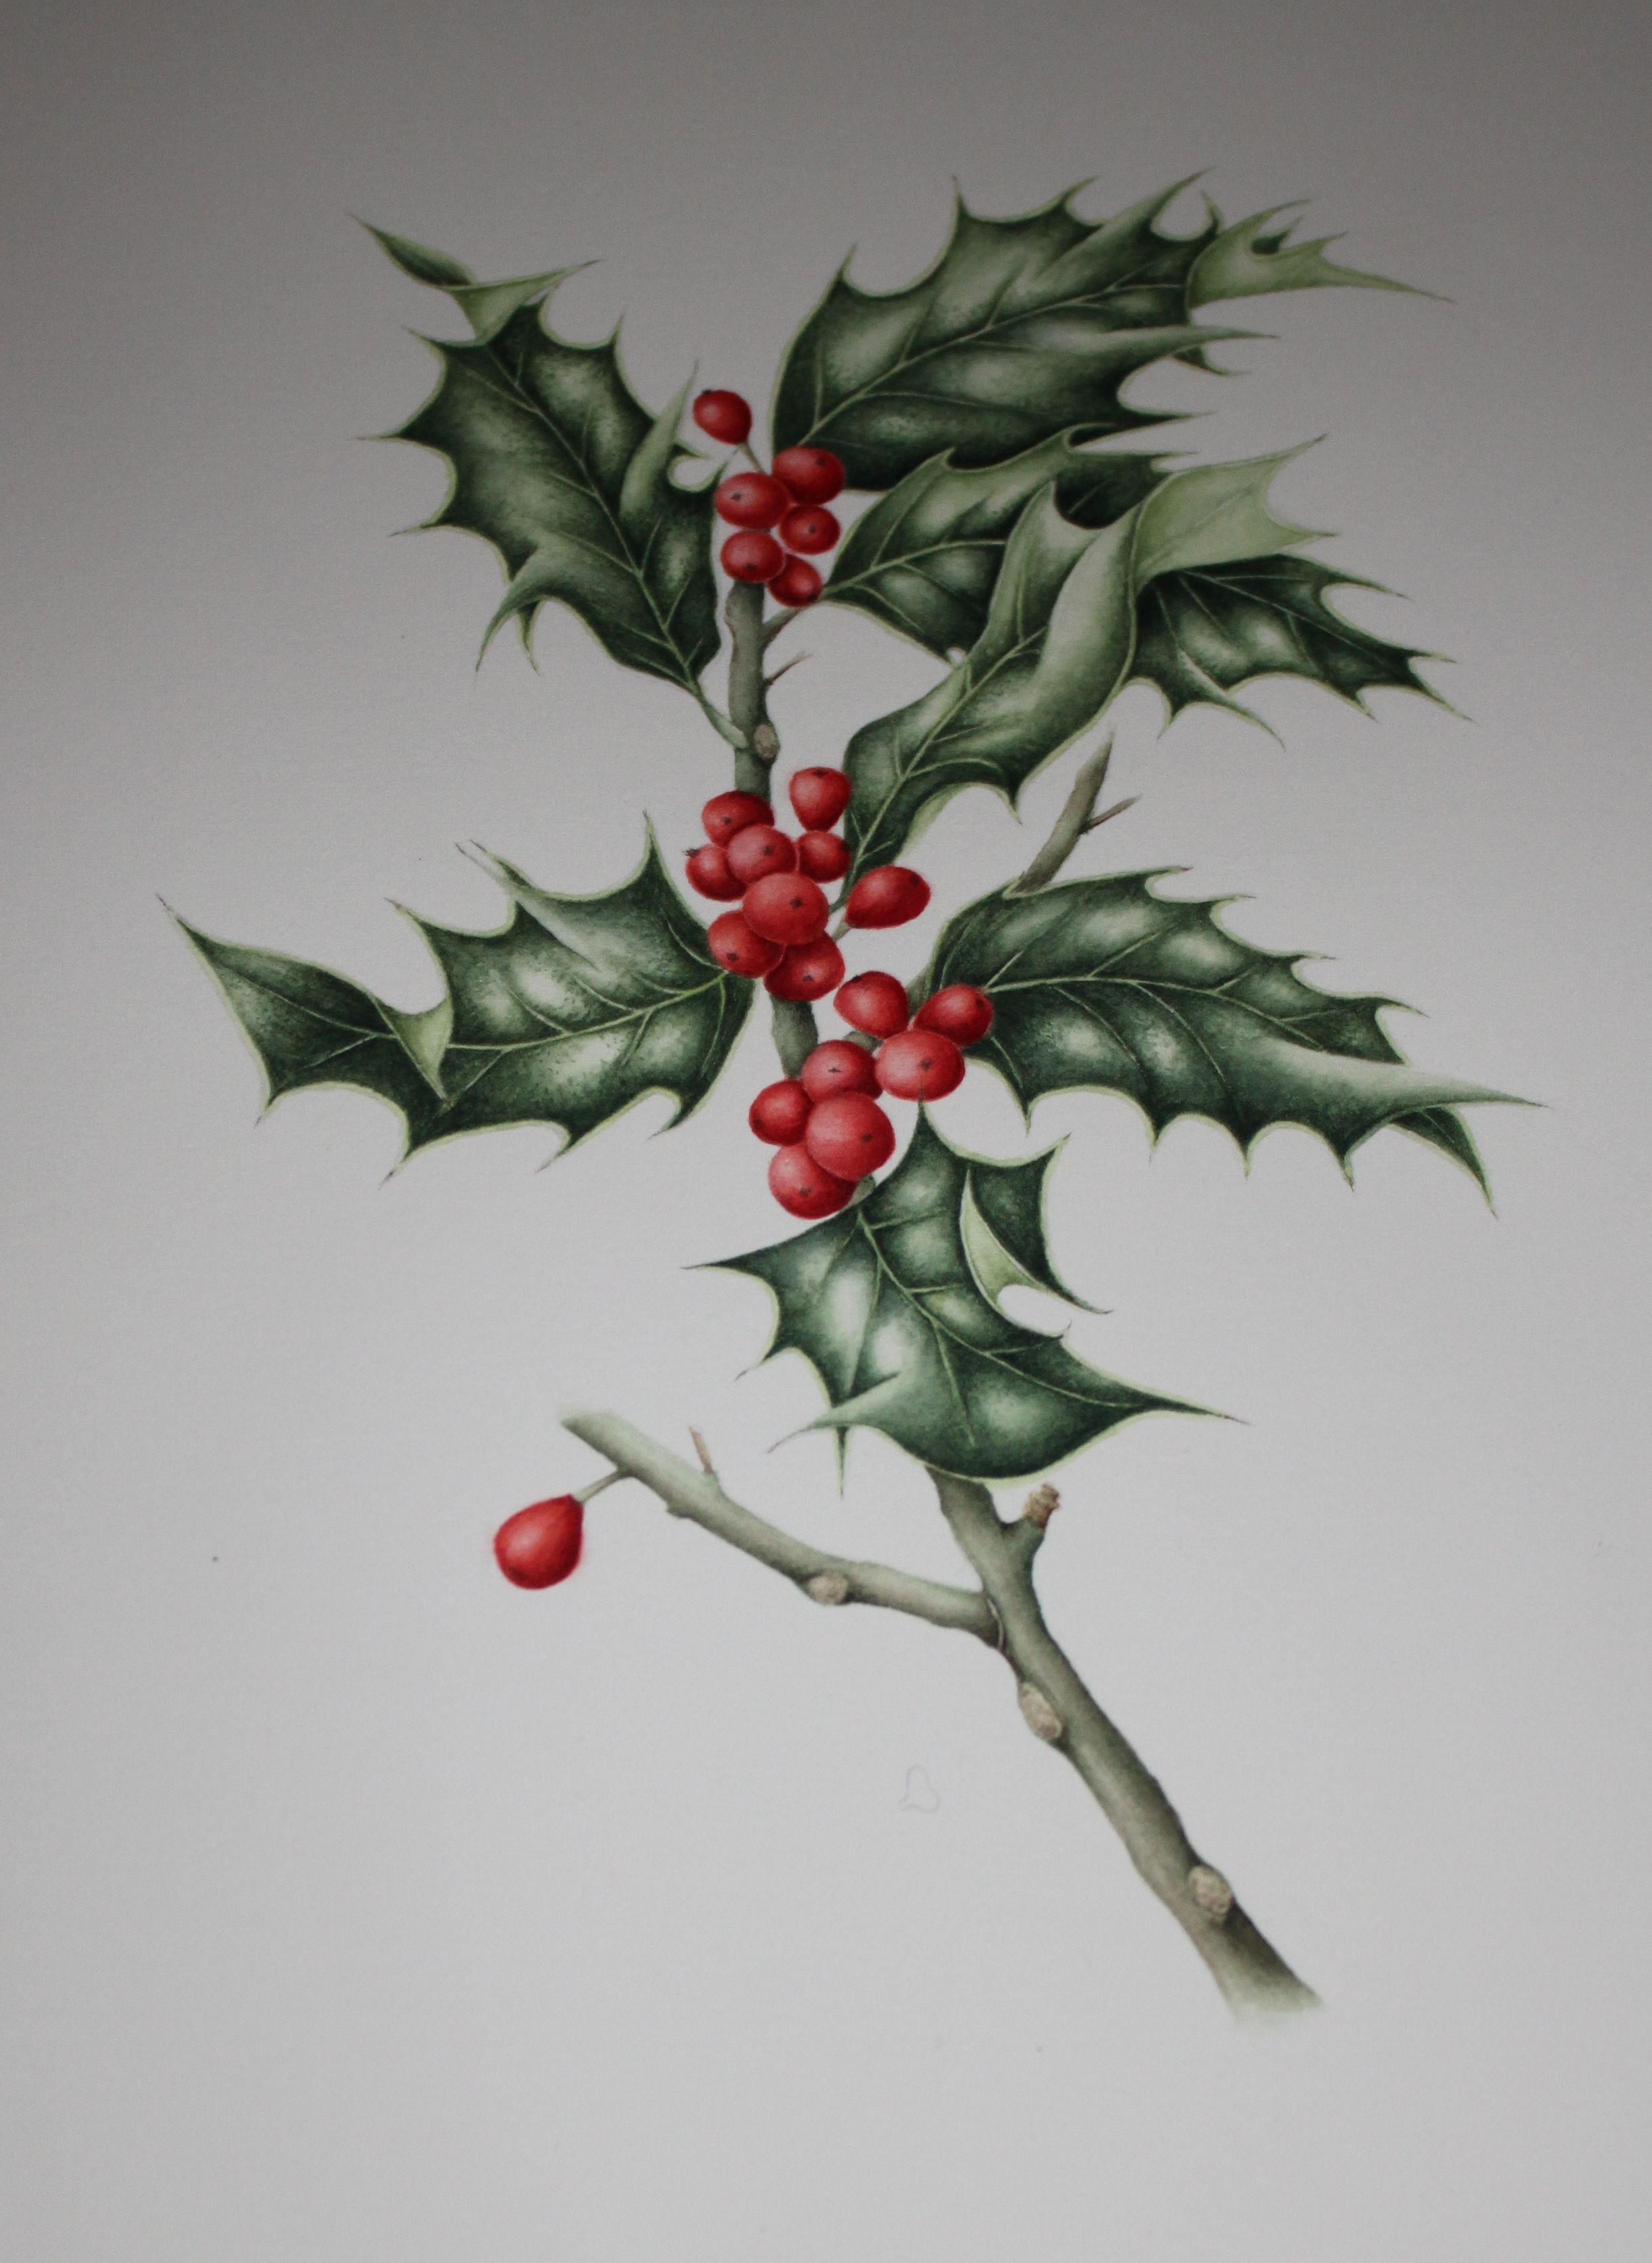 Drawing Holly Leaves And Berries at Explore